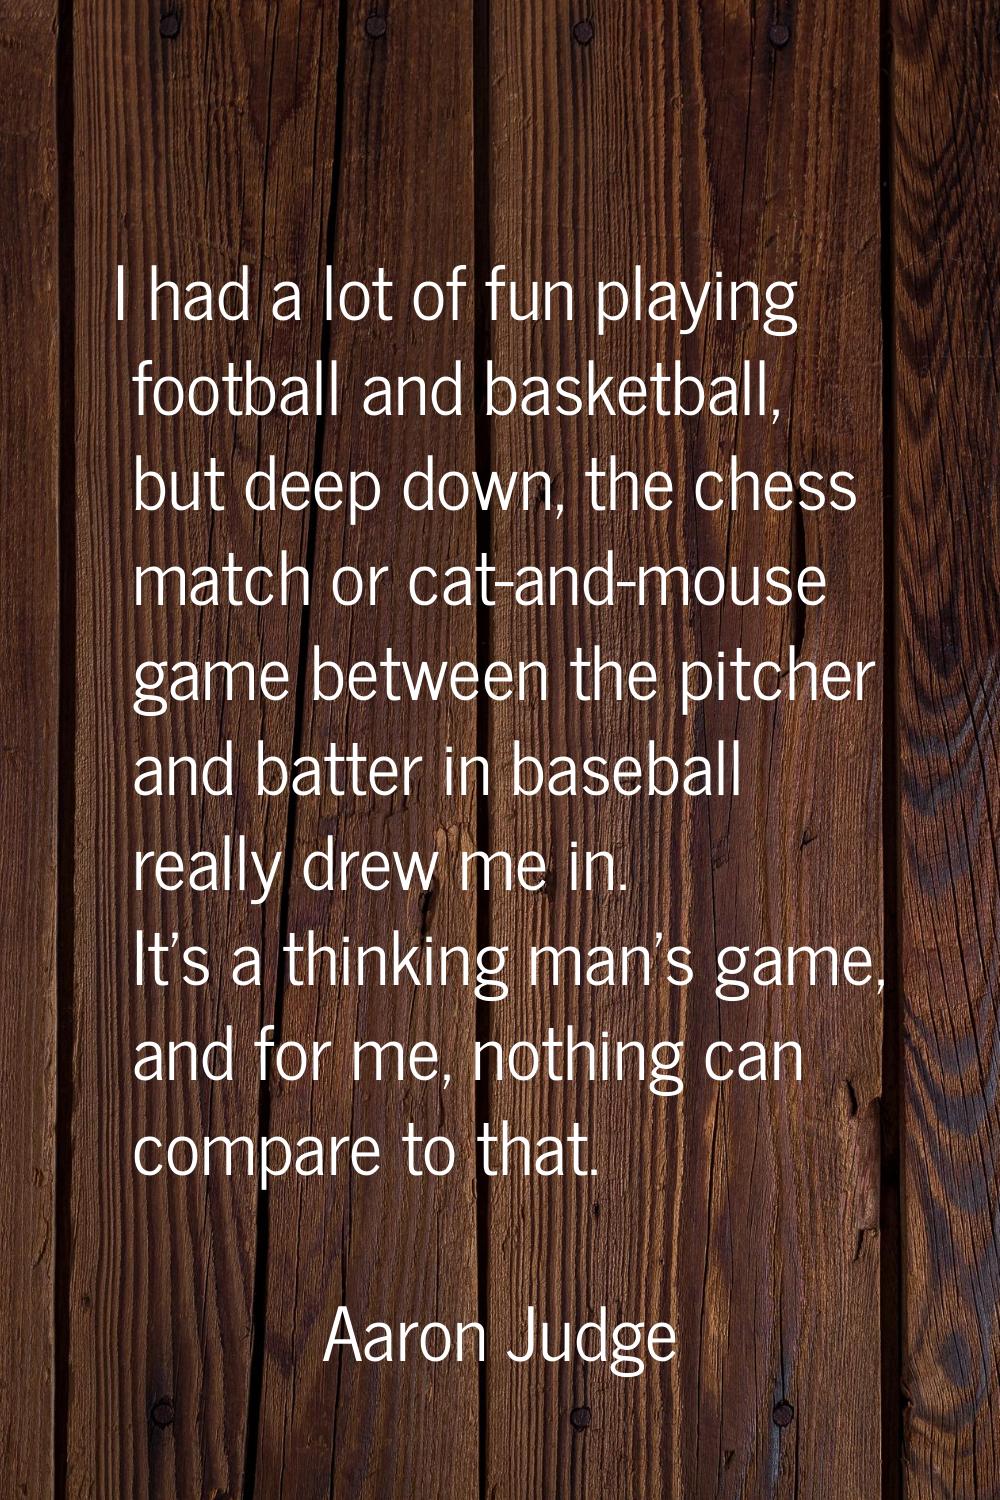 I had a lot of fun playing football and basketball, but deep down, the chess match or cat-and-mouse